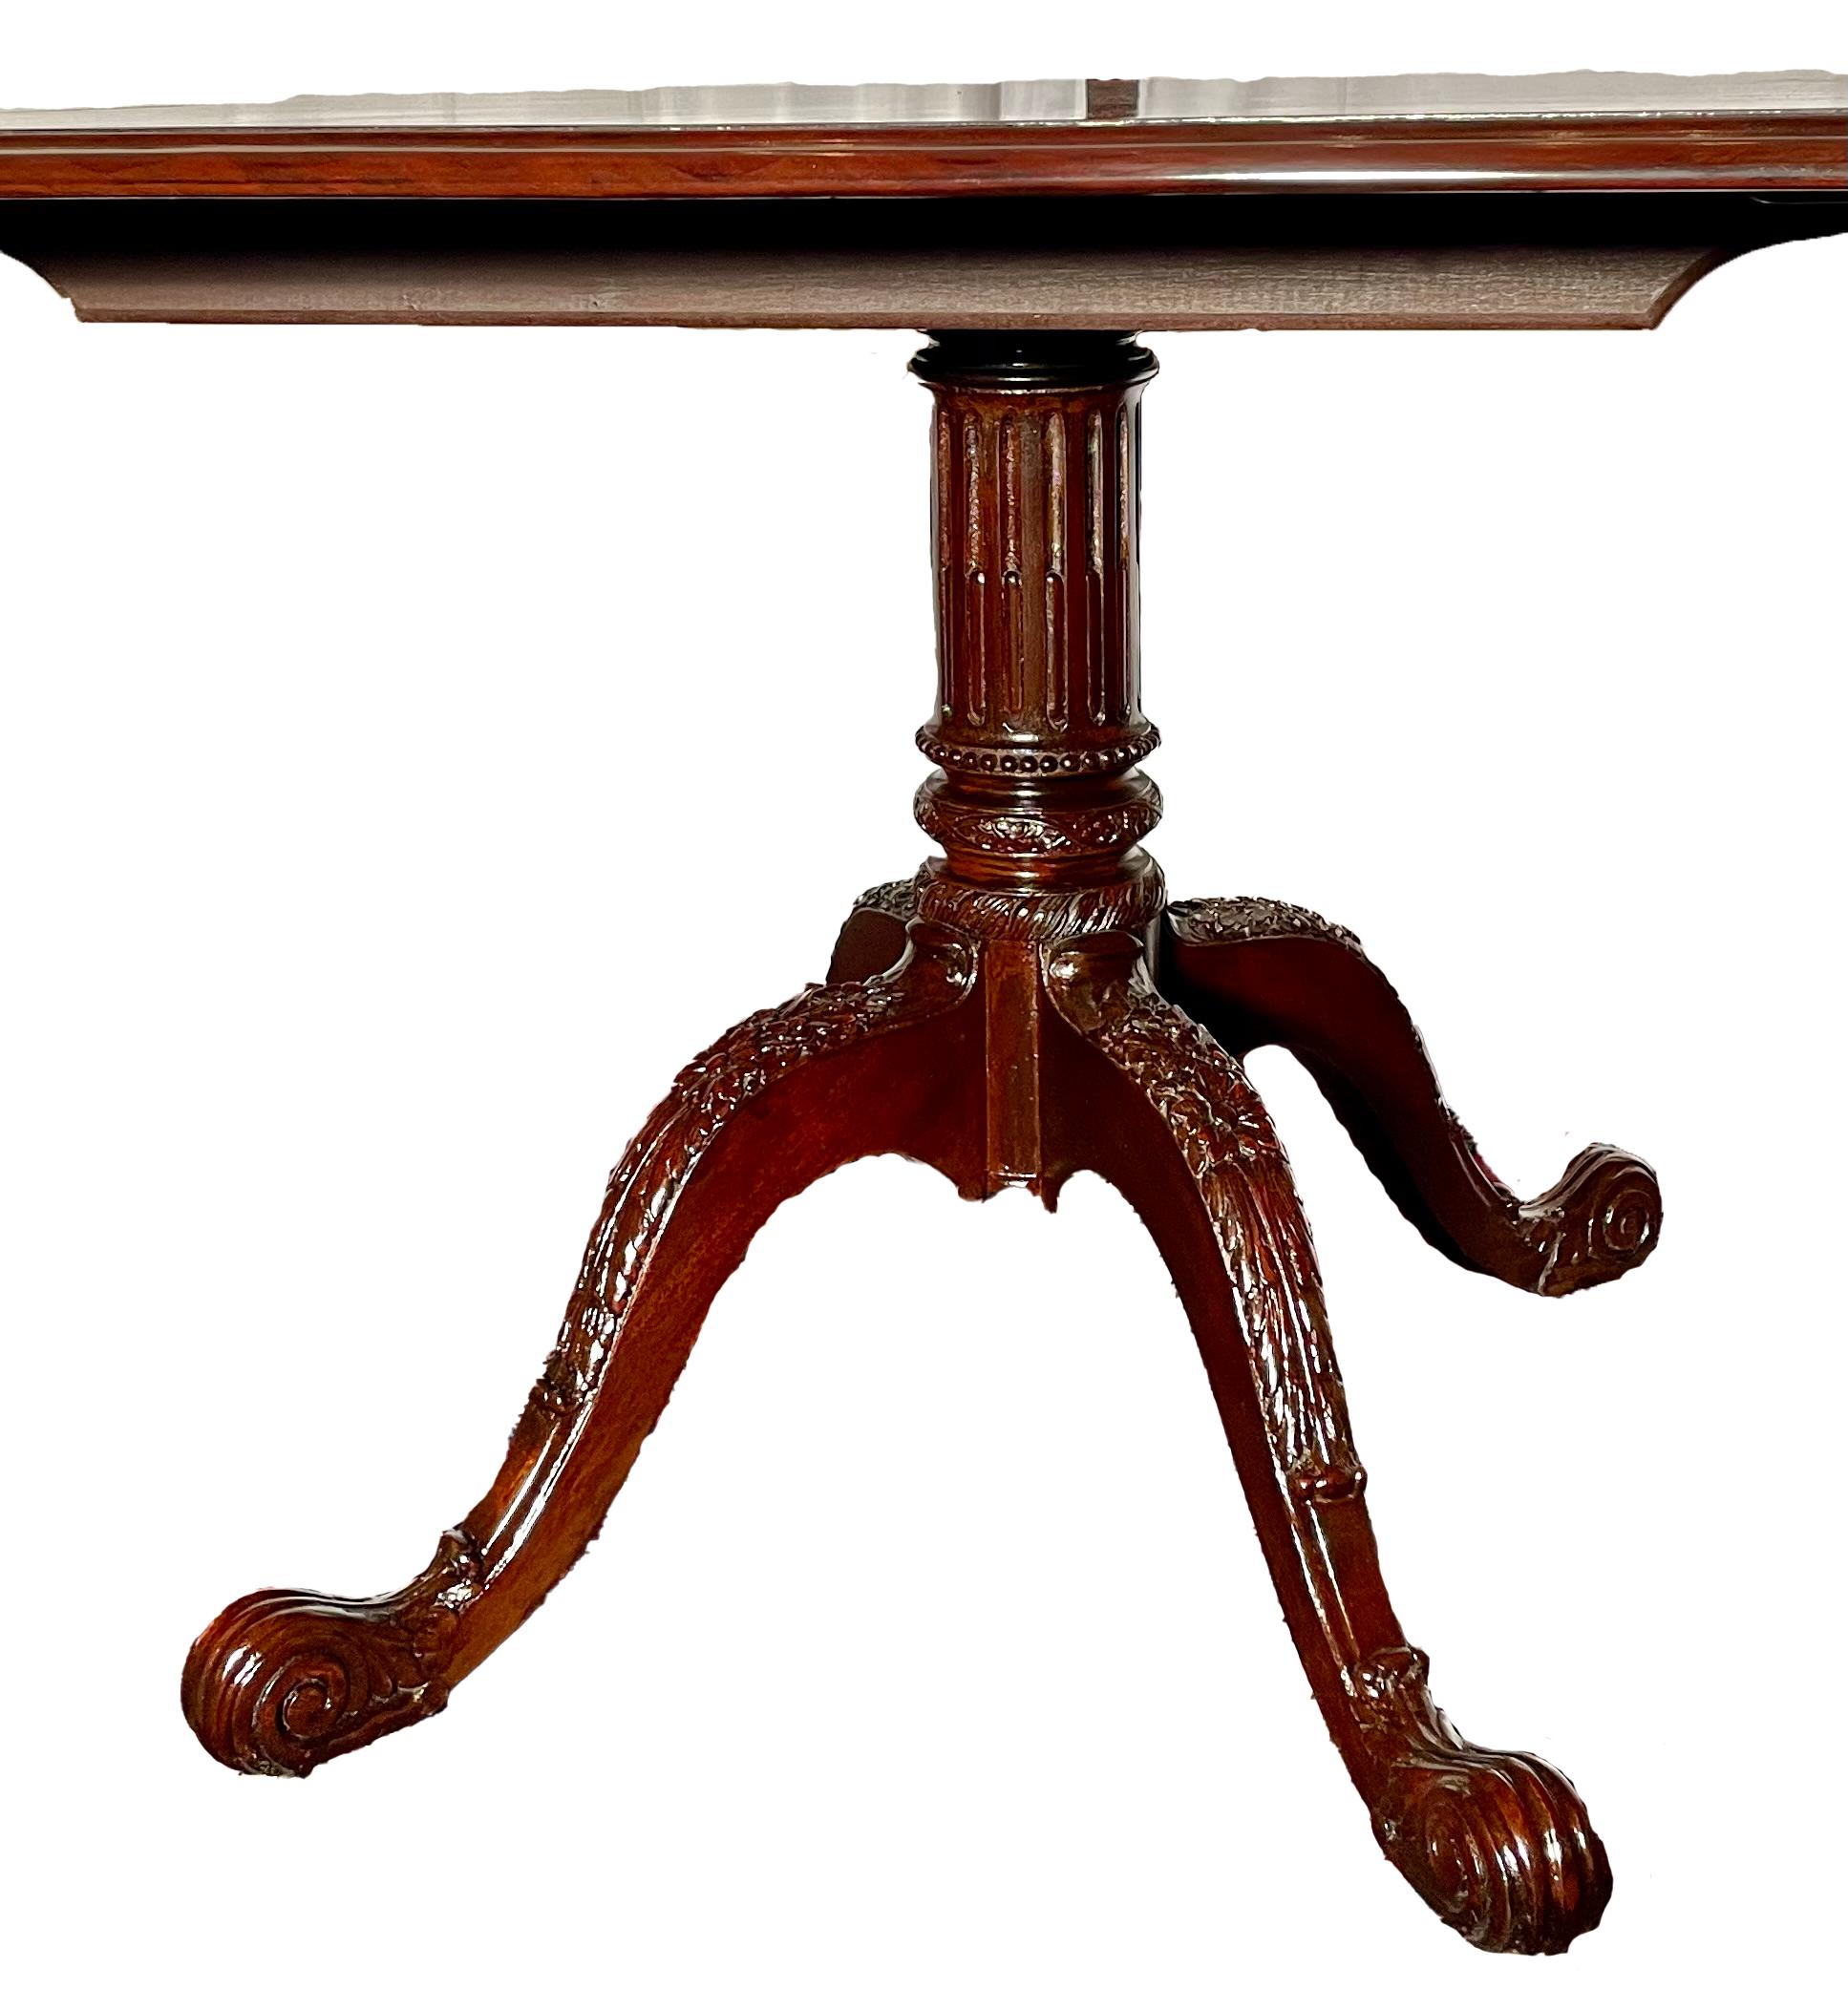 Fine Estate English Solid Mahogany Three-Pedestal Dining Table, circa 1950-1970.
Shown fully extended at 12ft 3in long.  There are 2 Leaves each 21 inches wide.